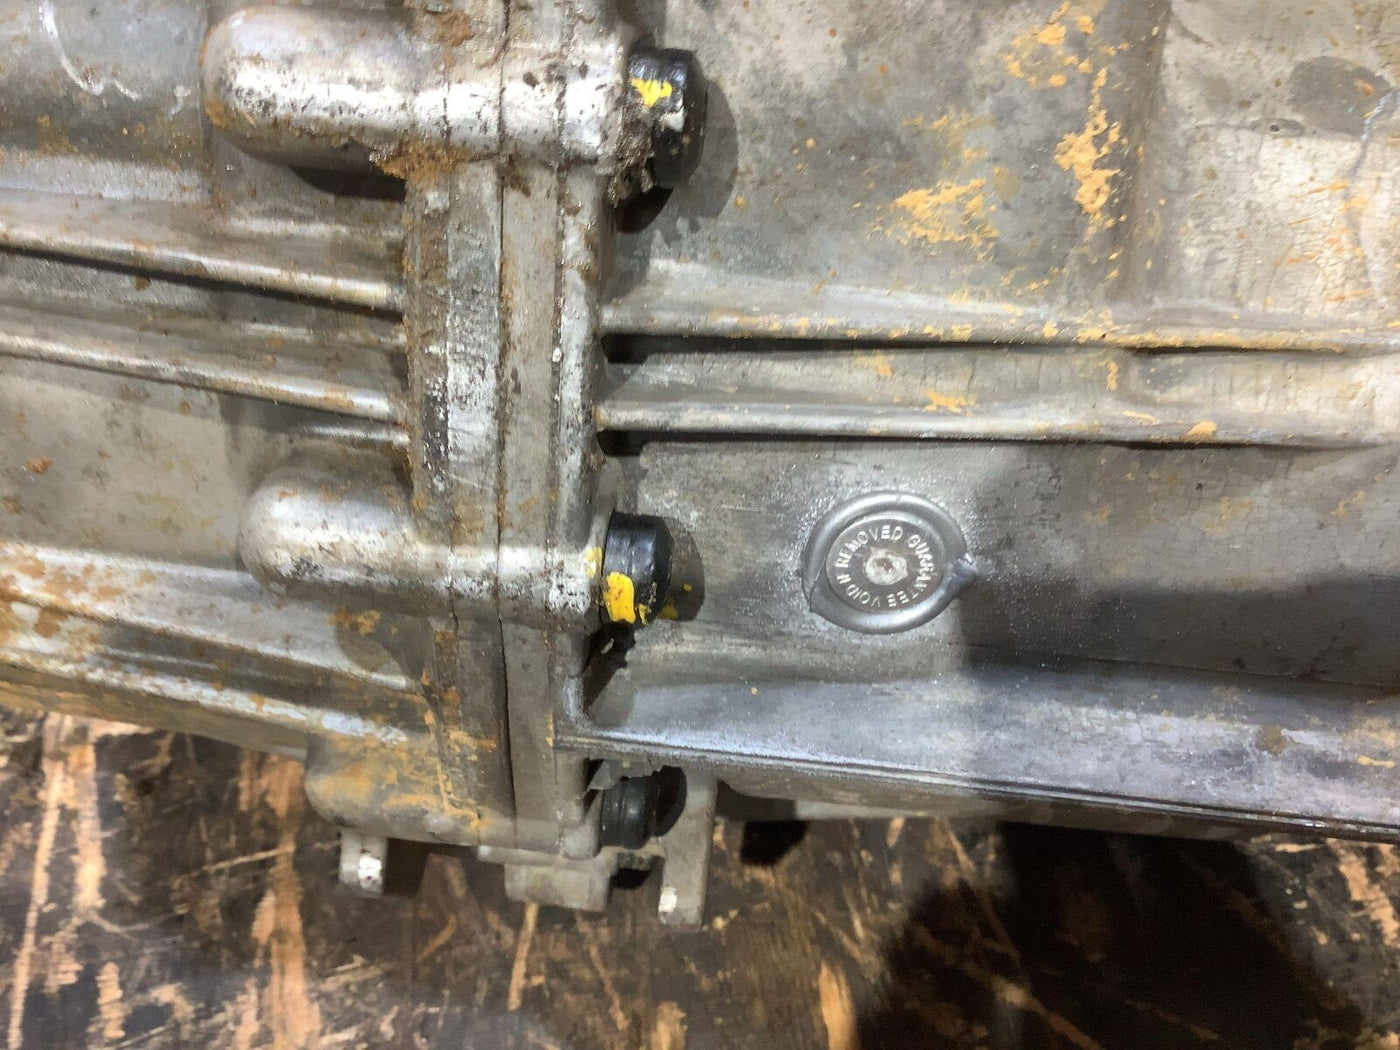 2003-2007 Hummer H2 AWD Transfer Case 121K Miles (Unable To Test)